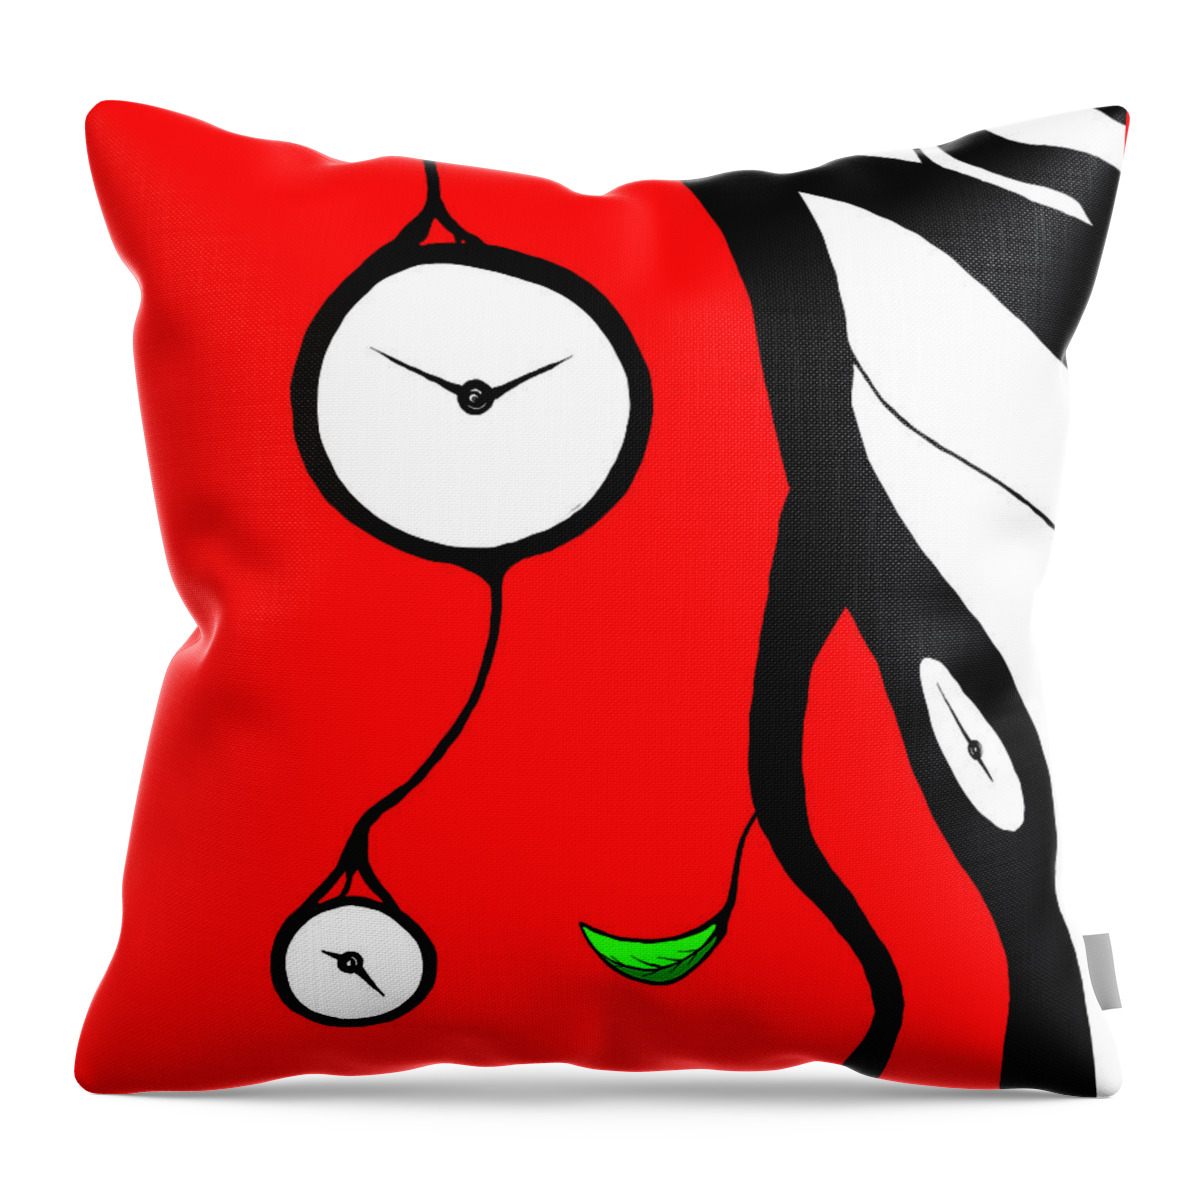 Tree Throw Pillow featuring the digital art Making Time by Craig Tilley